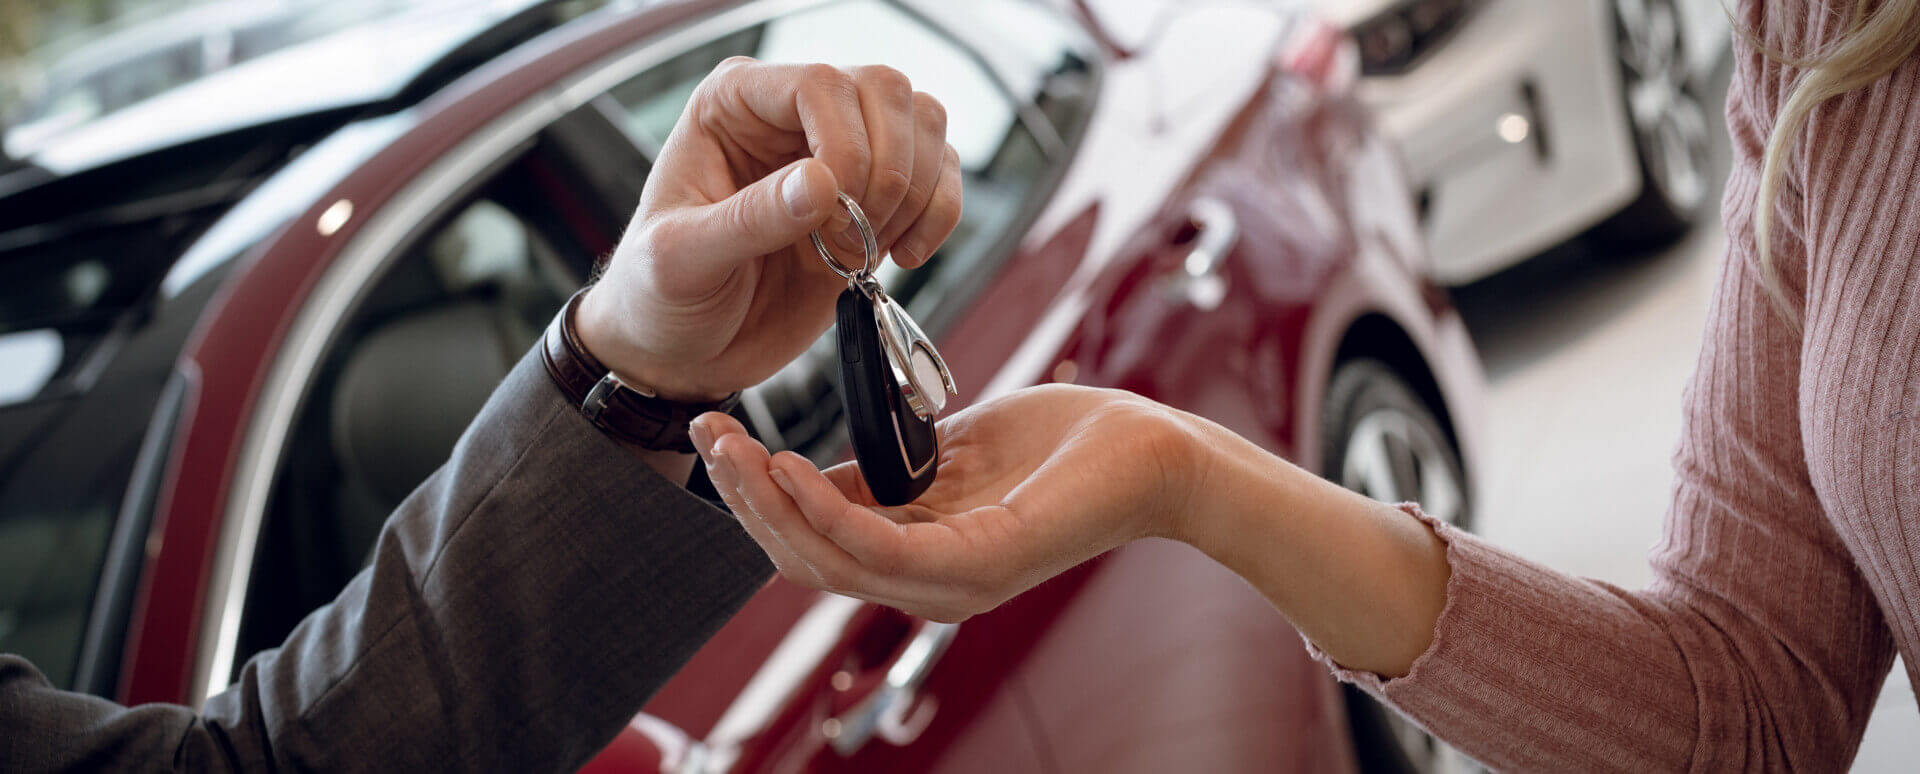 How To Sell A Car Privately With Outstanding Finance?